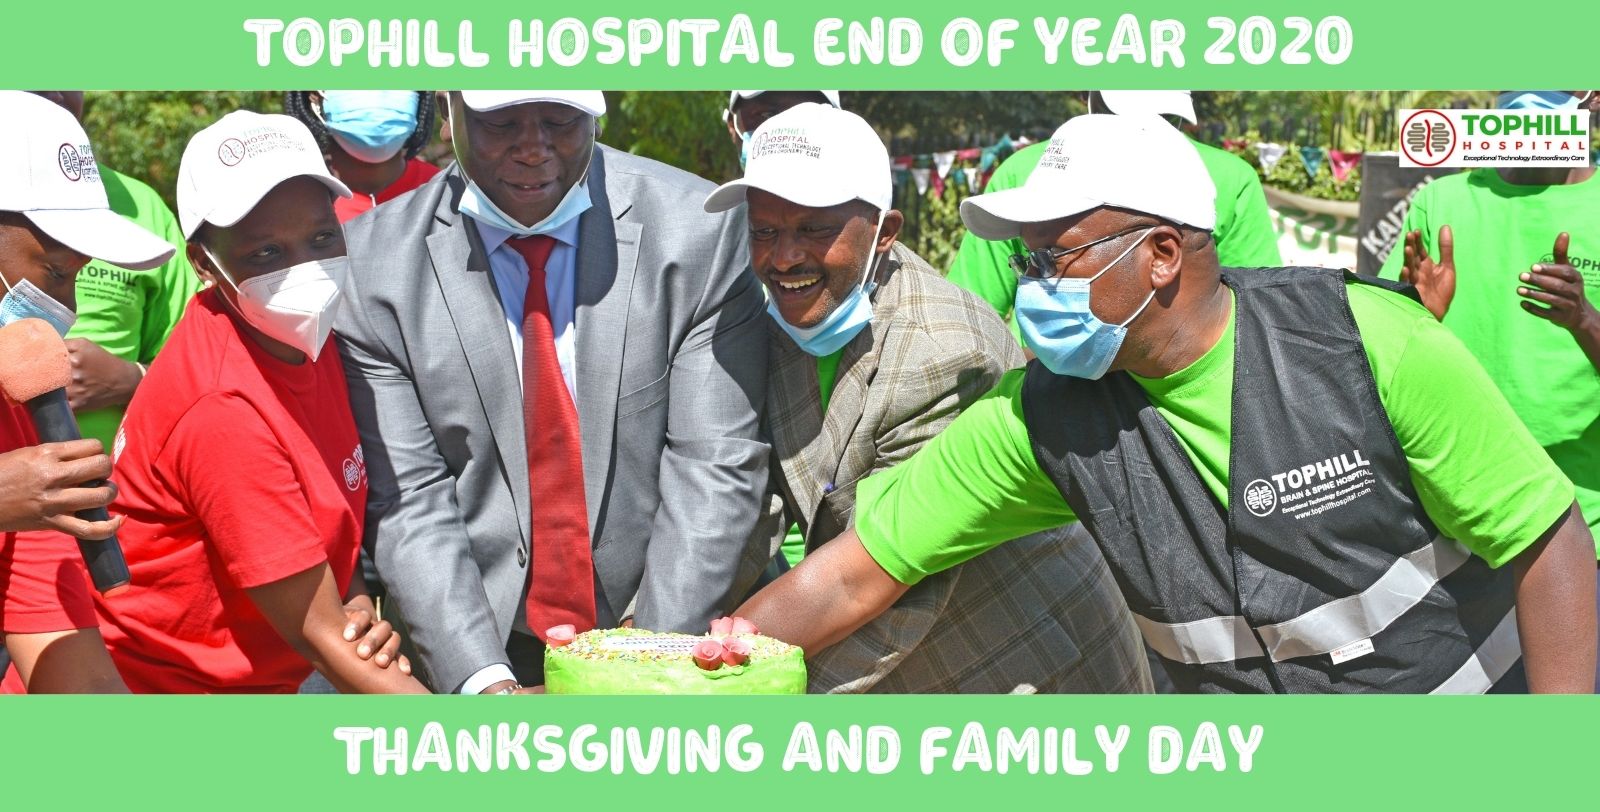 Tophill Hospital End of Year 2020 Thanksgiving and Family Day